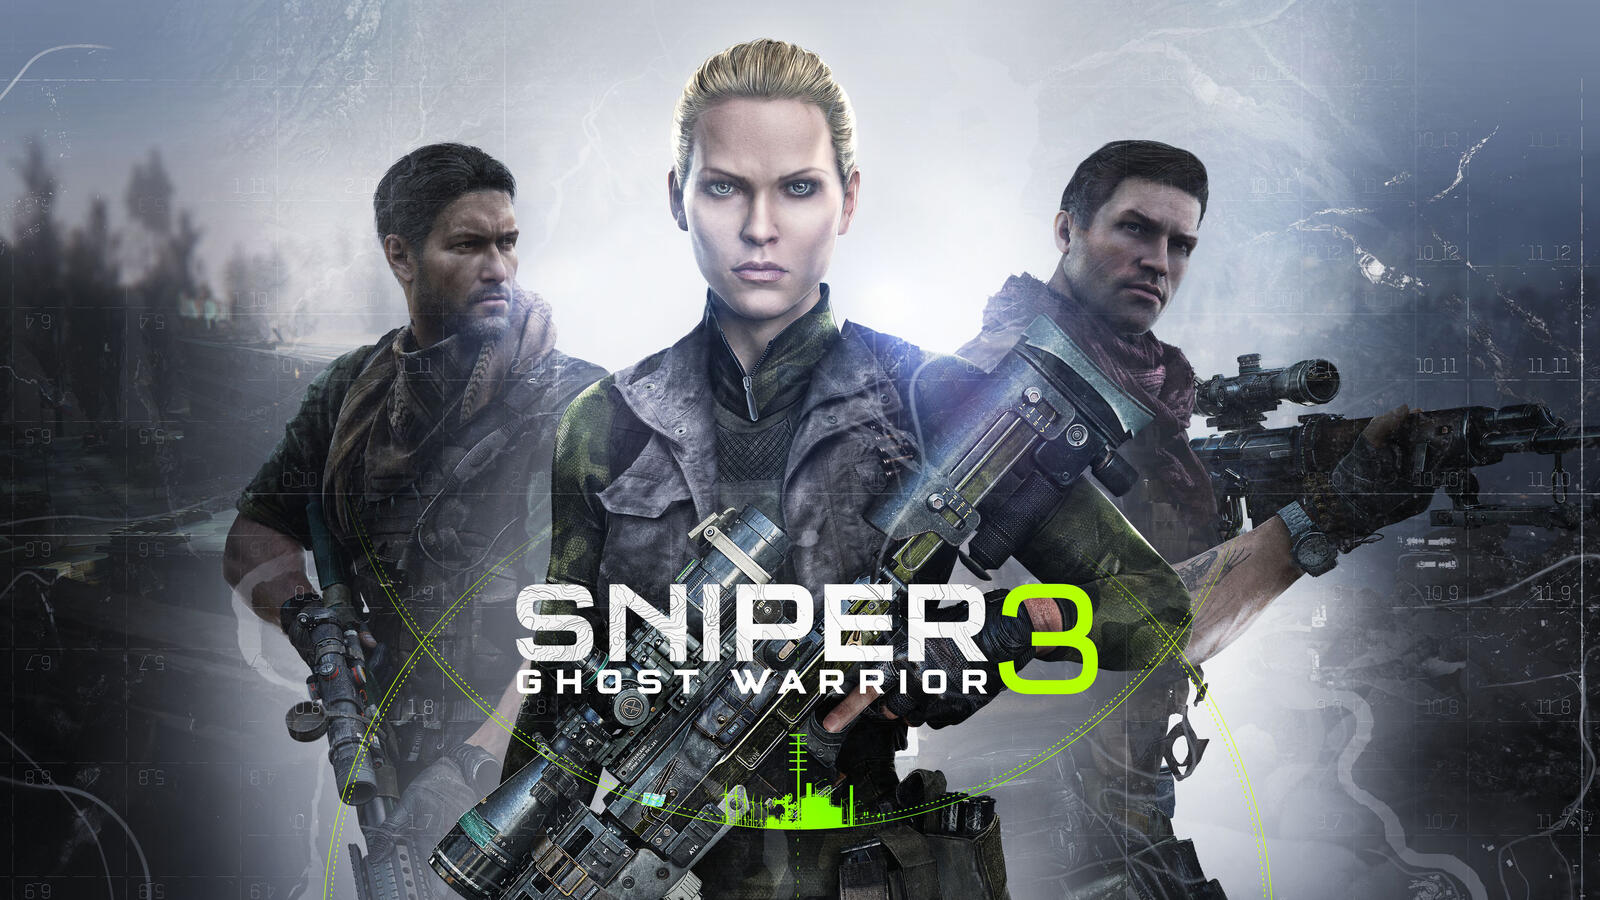 Wallpapers weapons sniper 3 ghost warrior games on the desktop